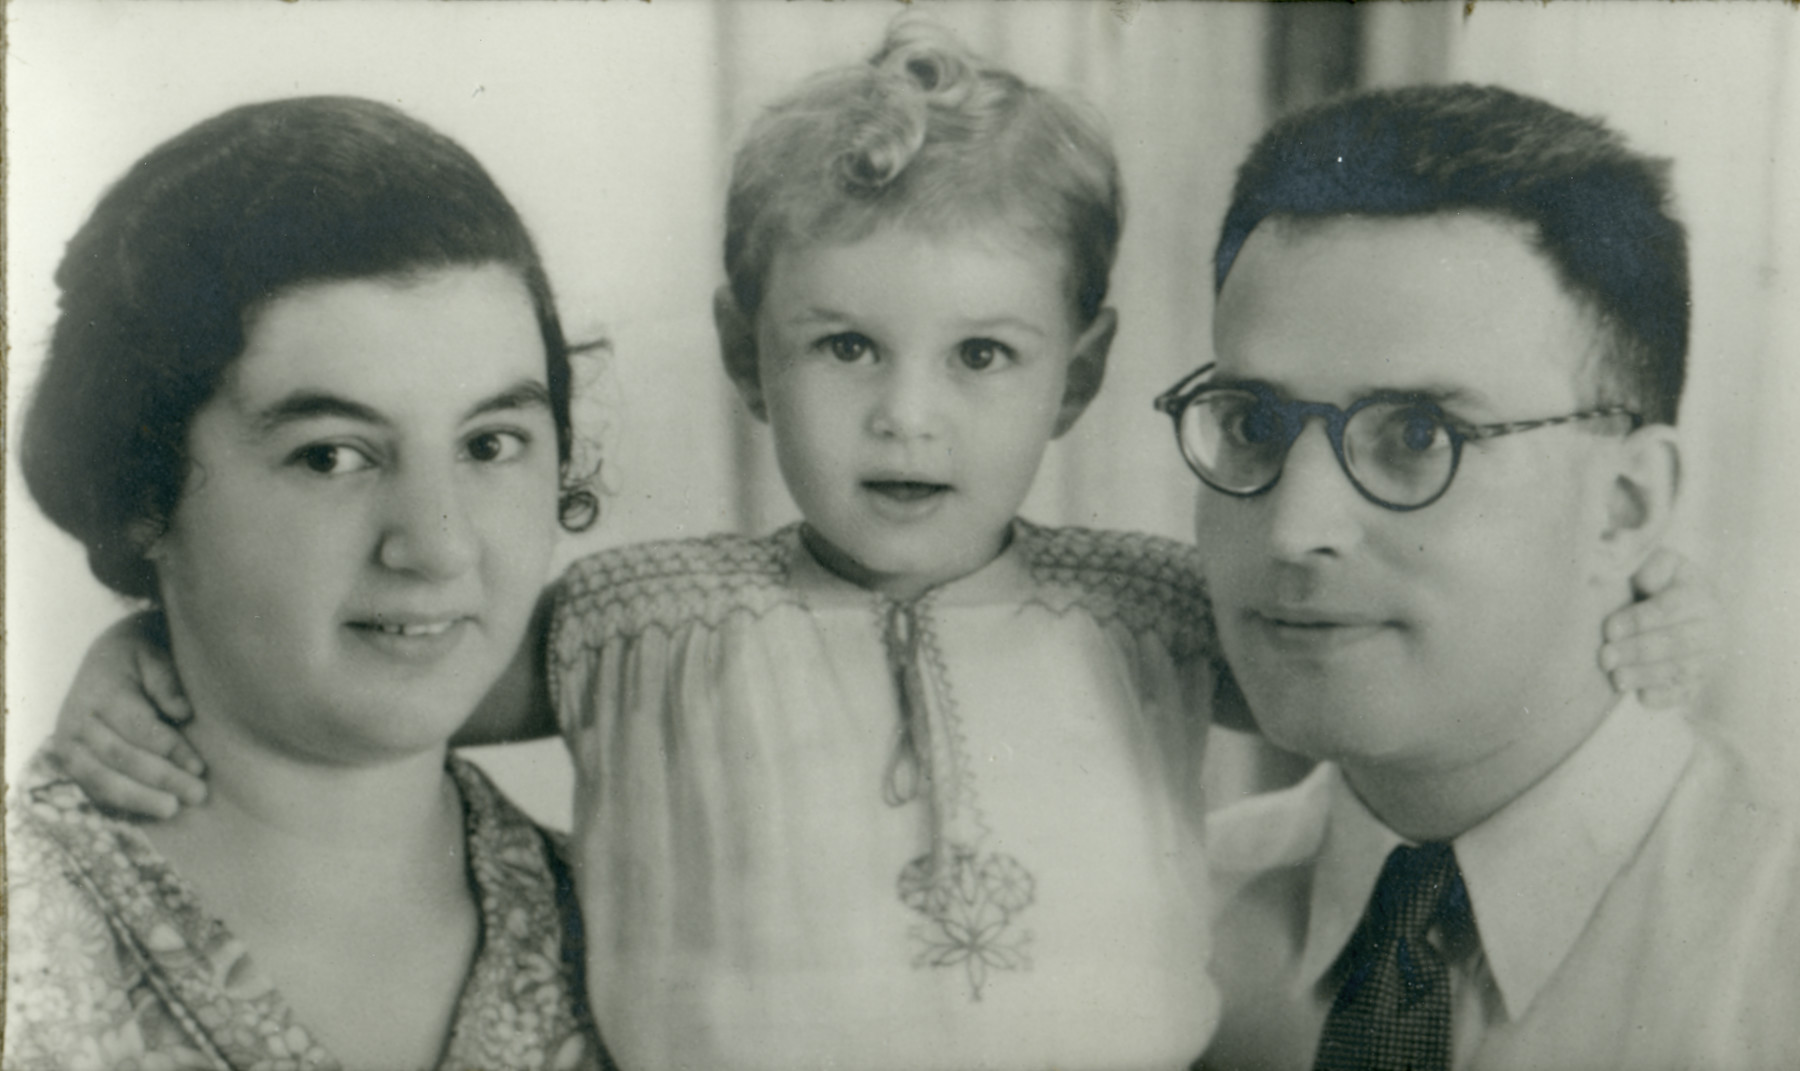 Close-up portrait of the Beninnga family, Dutch Jewish refugees in Indonesia.

Pictured are Lena, Chana and Noah Benninga.